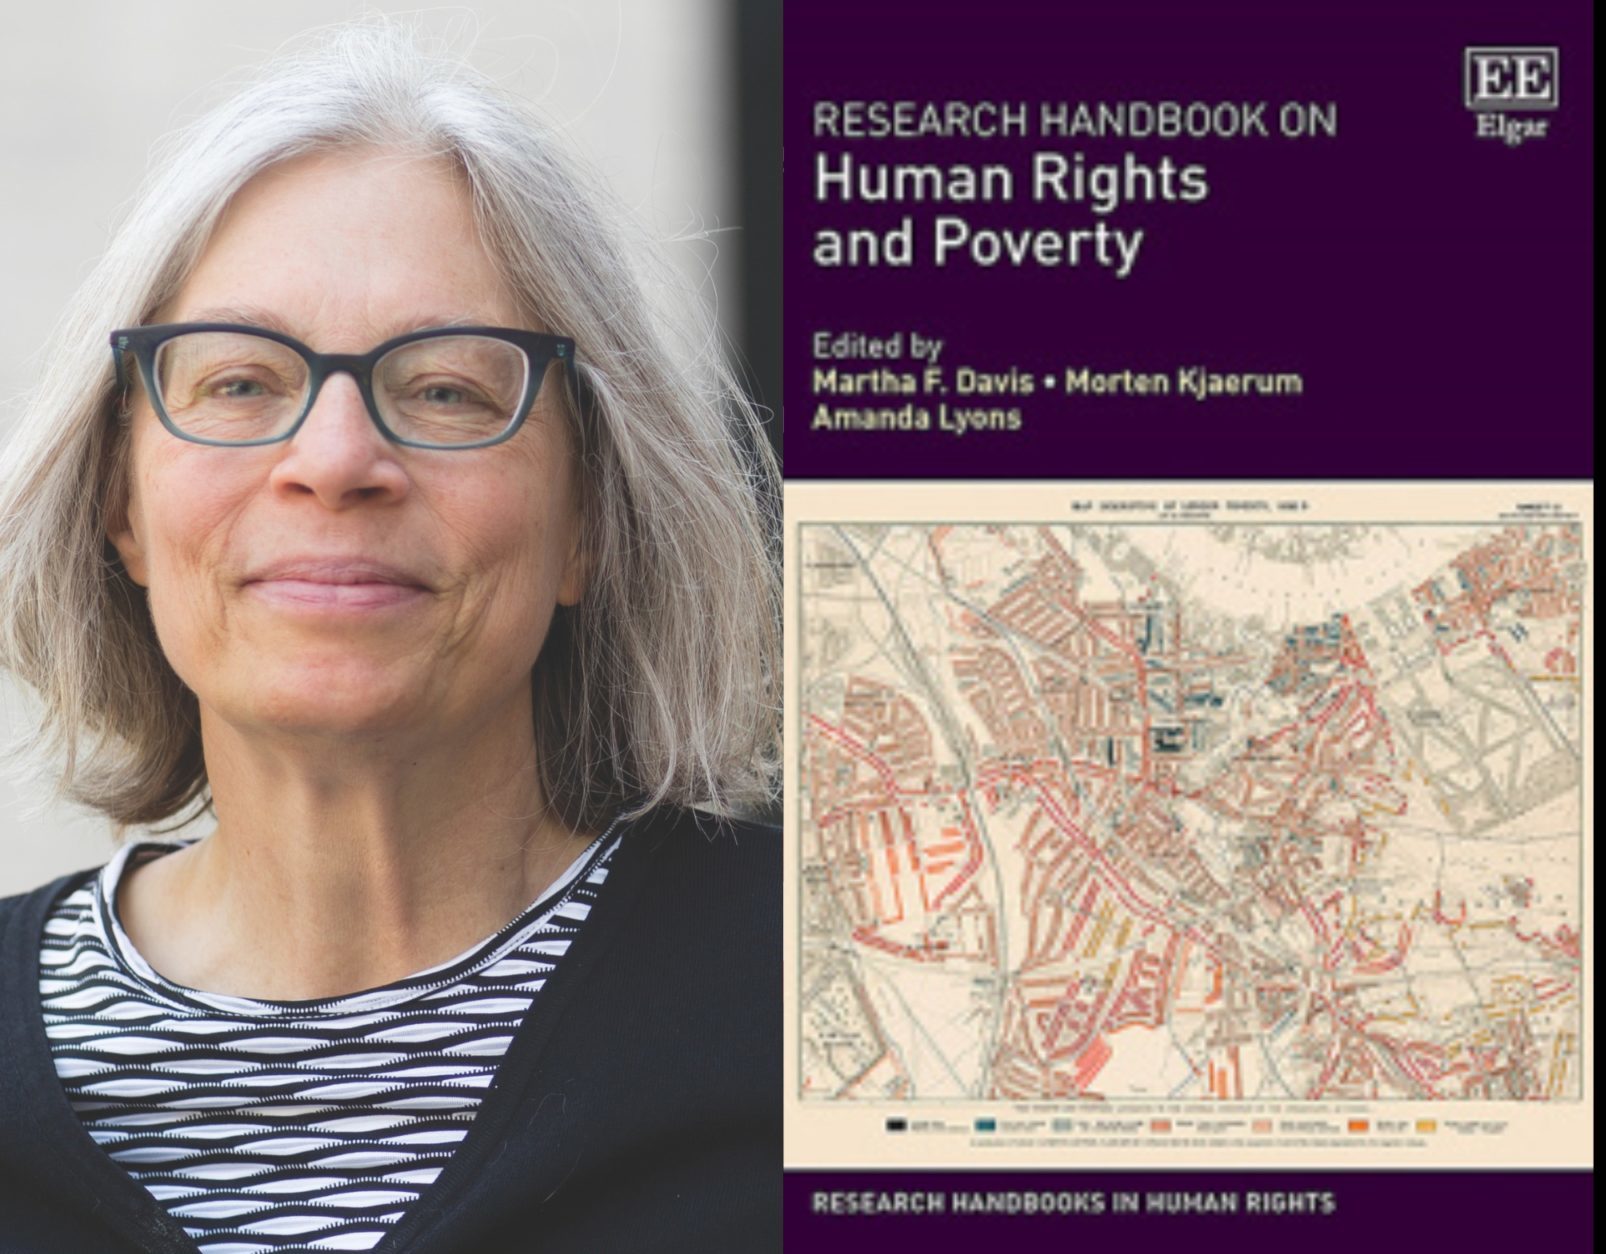 Now Available in Paperback! Professor Martha Davis’ Research Handbook on Human Rights and Poverty